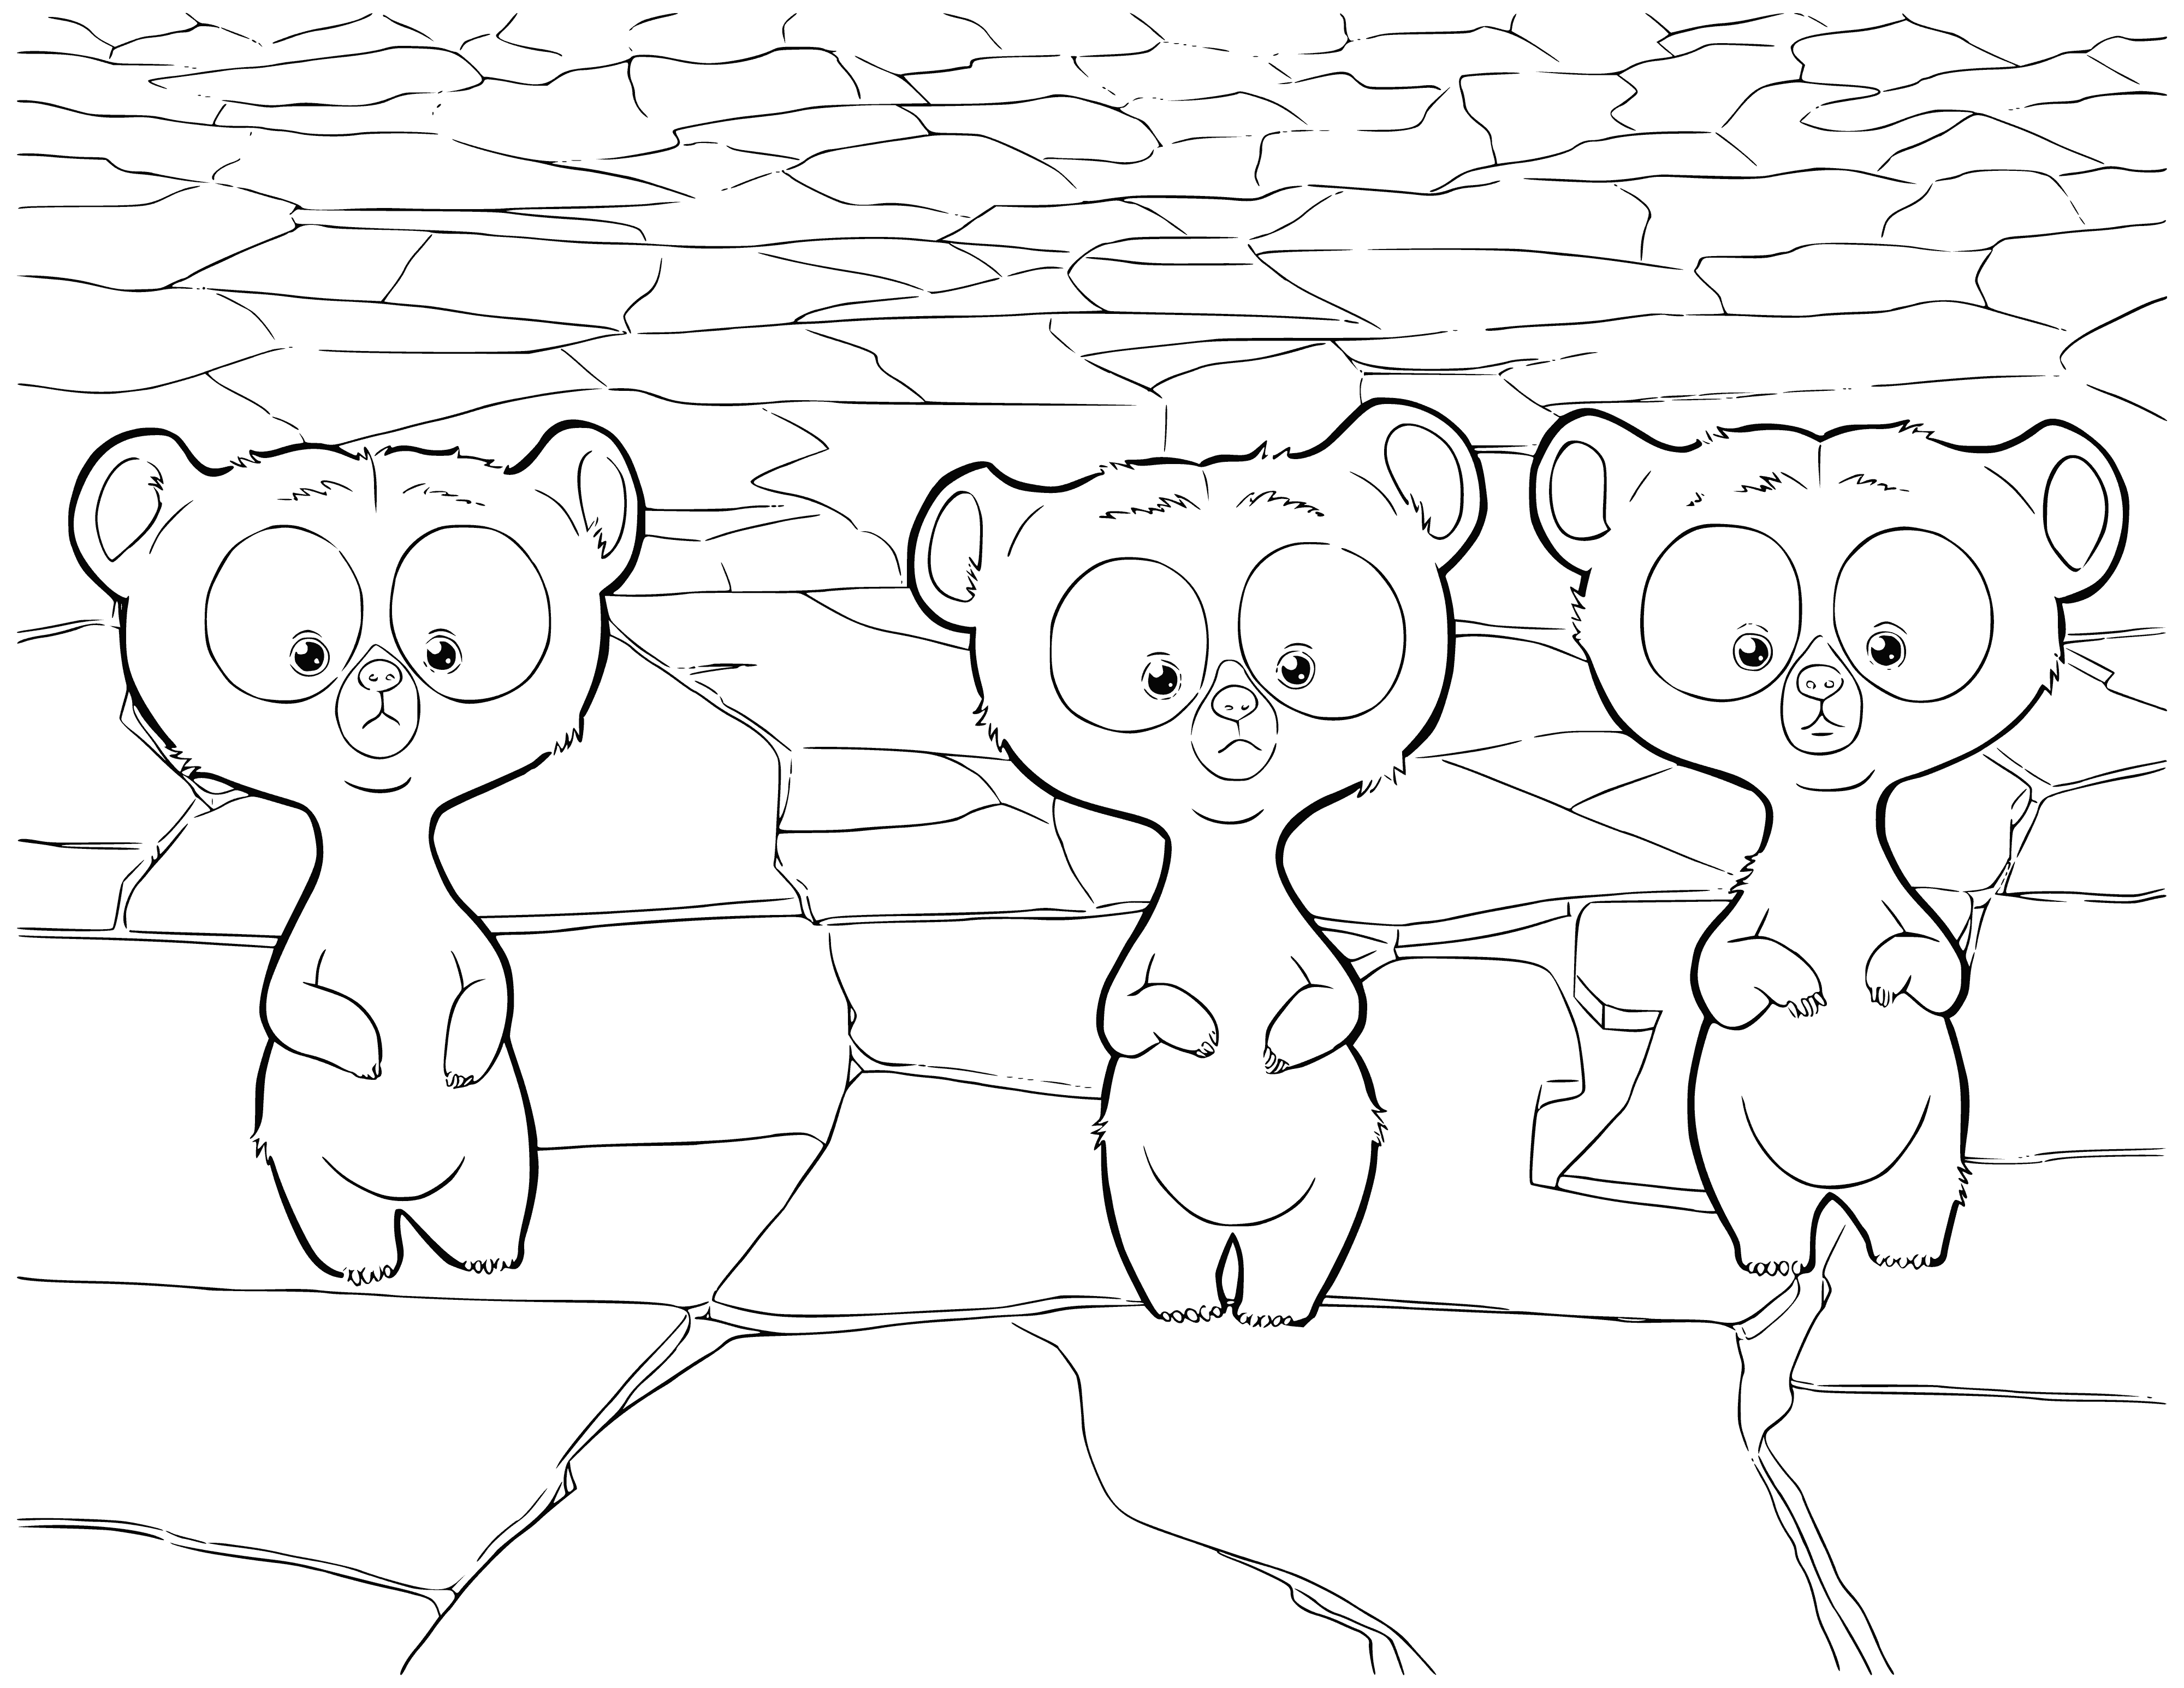 Merida's brothers turned into cubs coloring page